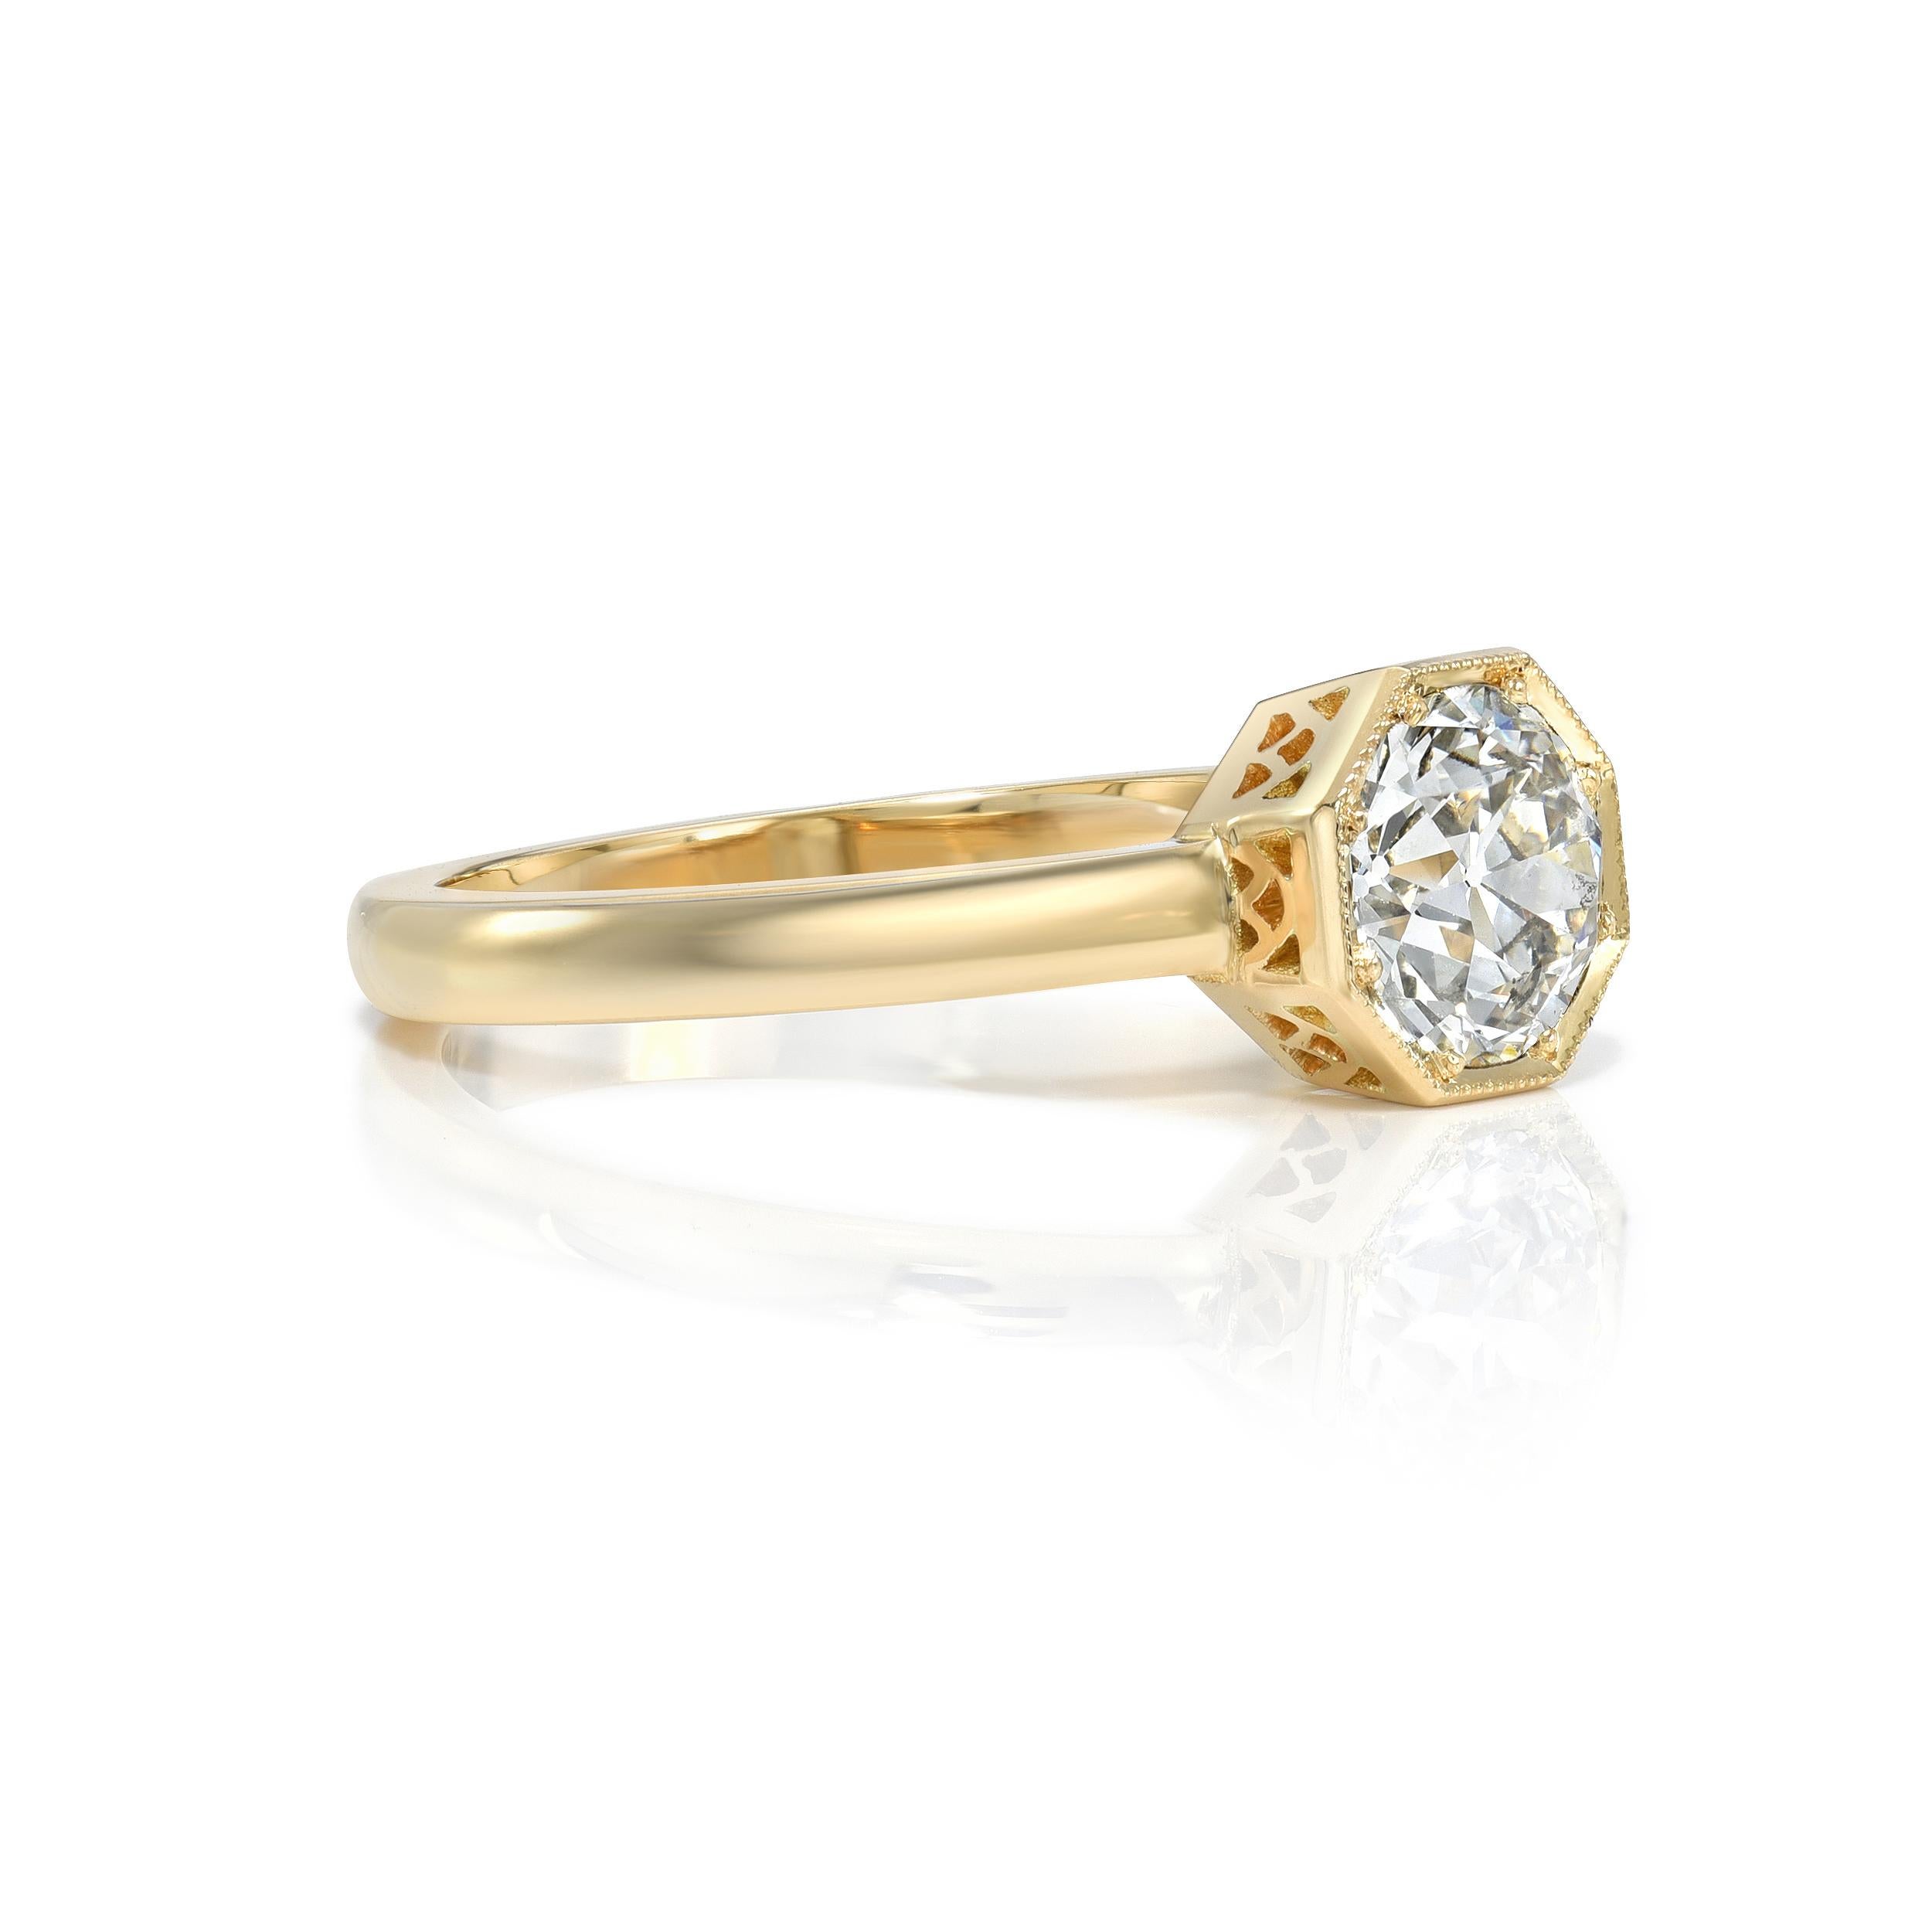 0.85ct H/SI2 GIA certified Old European cut diamond prong set in a handcrafted 18K yellow gold mounting.